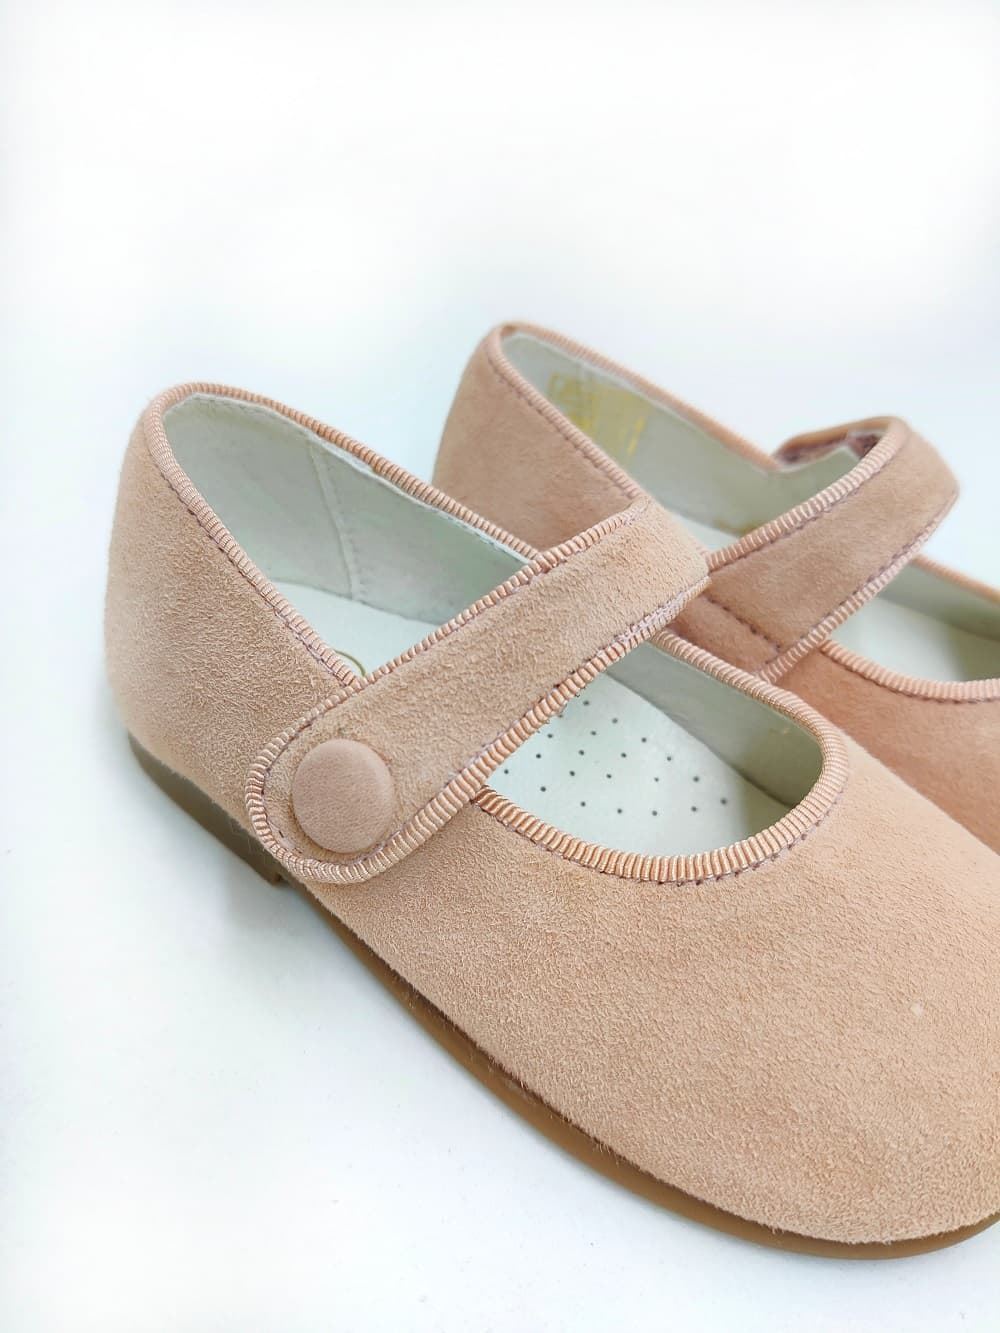 Pirufin (Piruflex) Mary Janes for baby girls in Pale Pink suede - Image 4